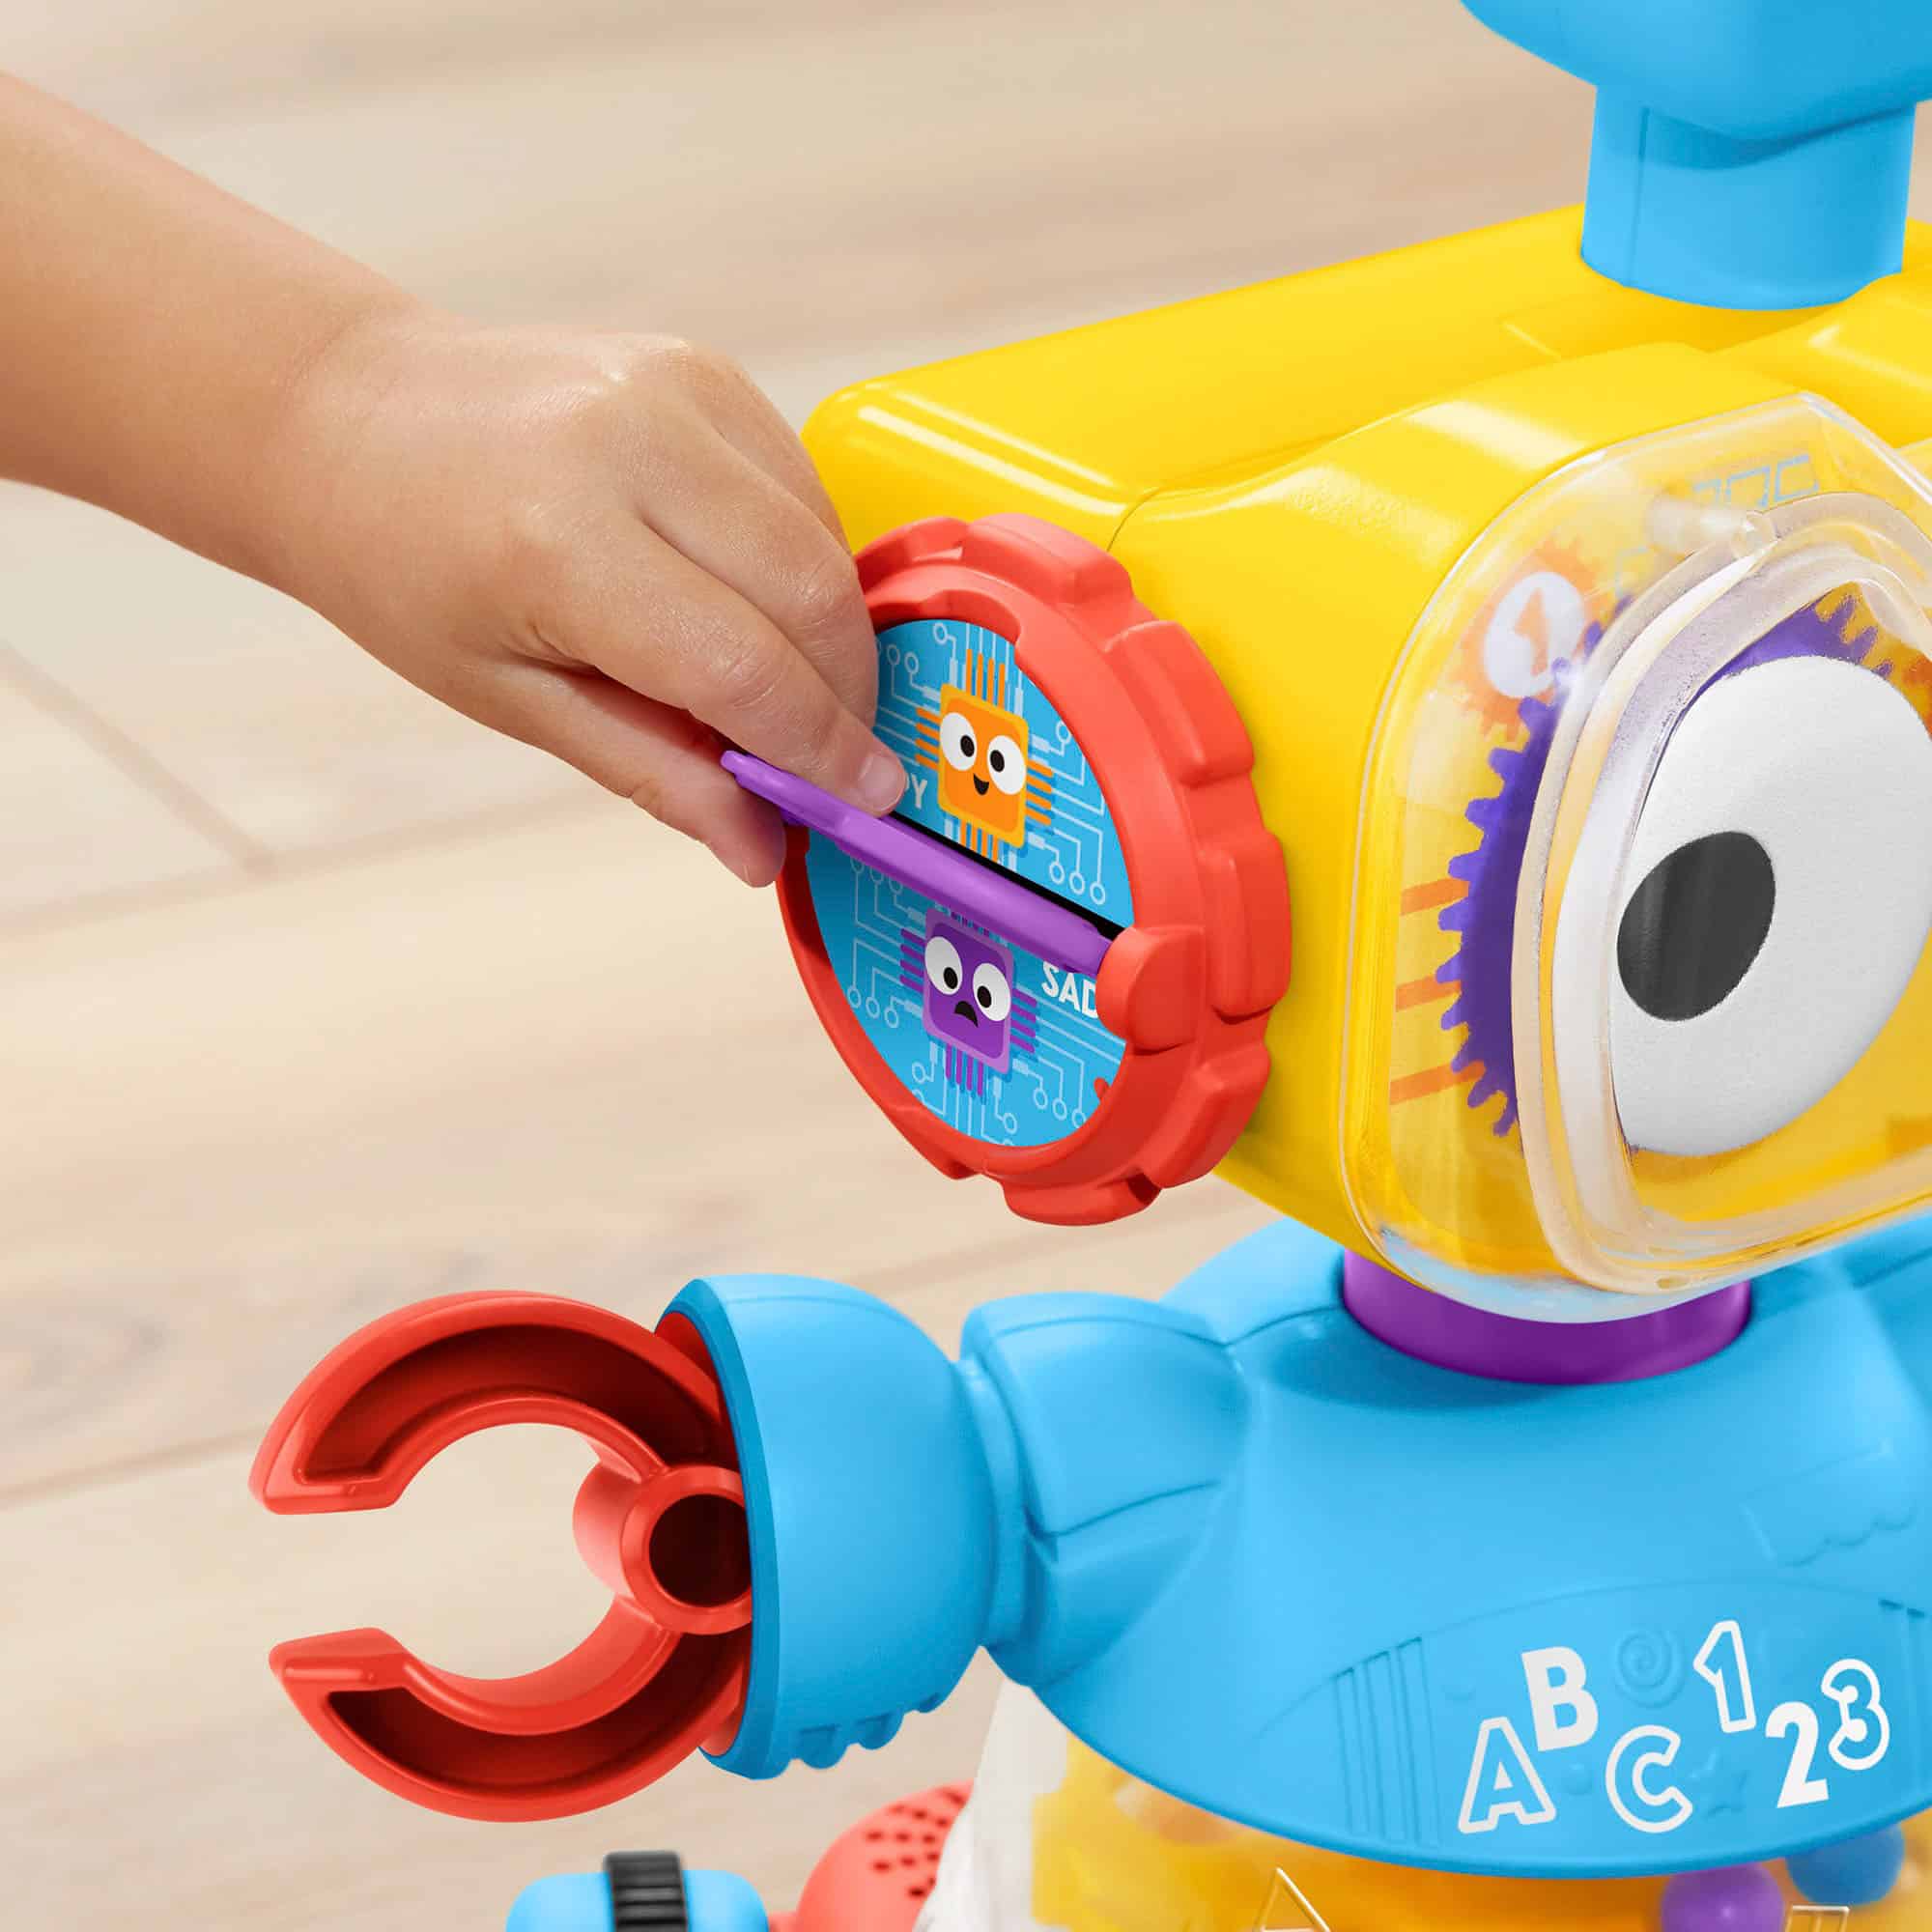 Fisher Price - 4-In-1 Ultimate Learning Bot